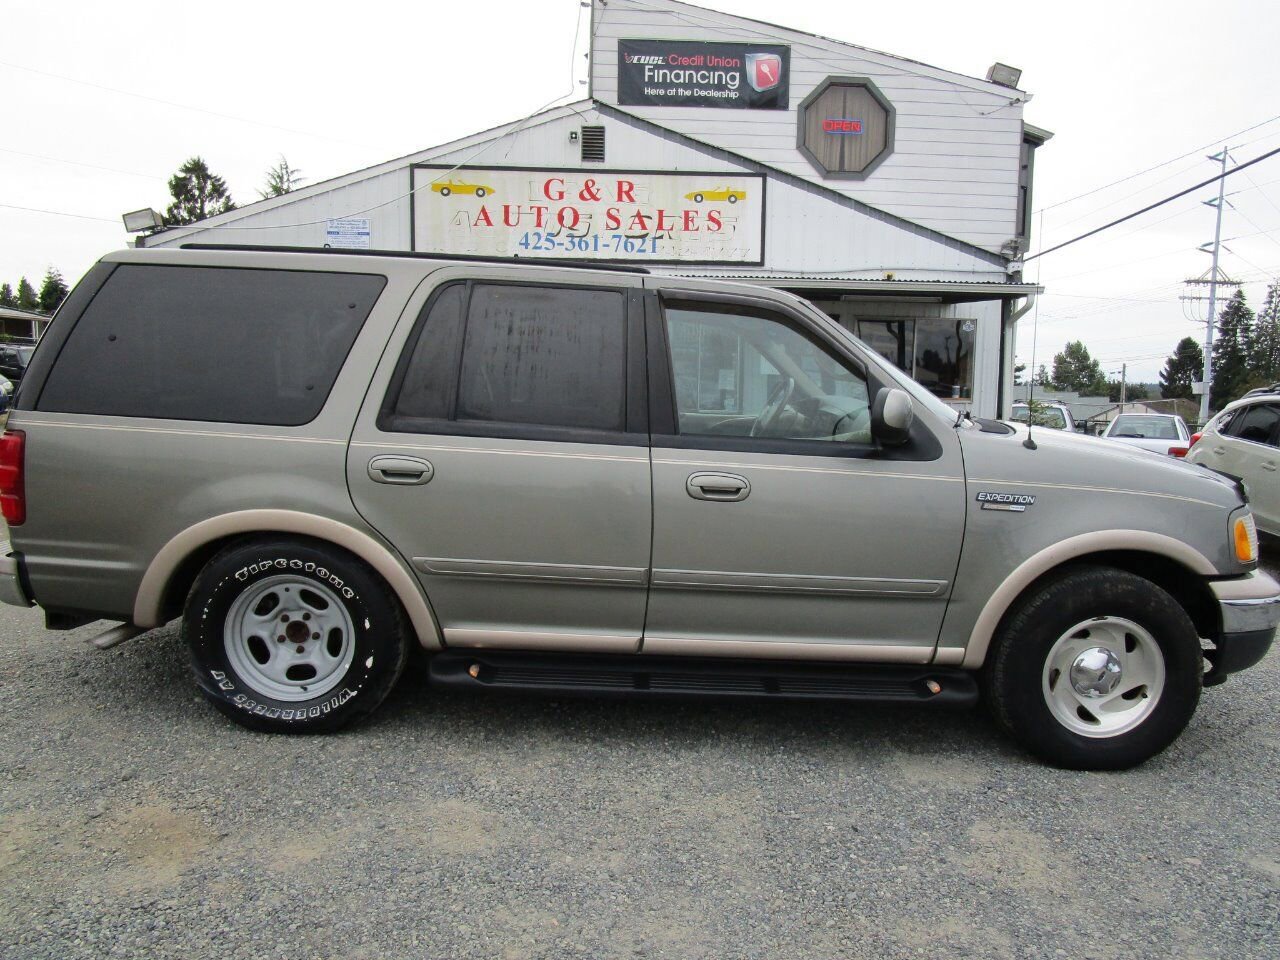 Used 1999 Ford Expedition for Sale in Seattle, WA (Test Drive at Home) -  Kelley Blue Book